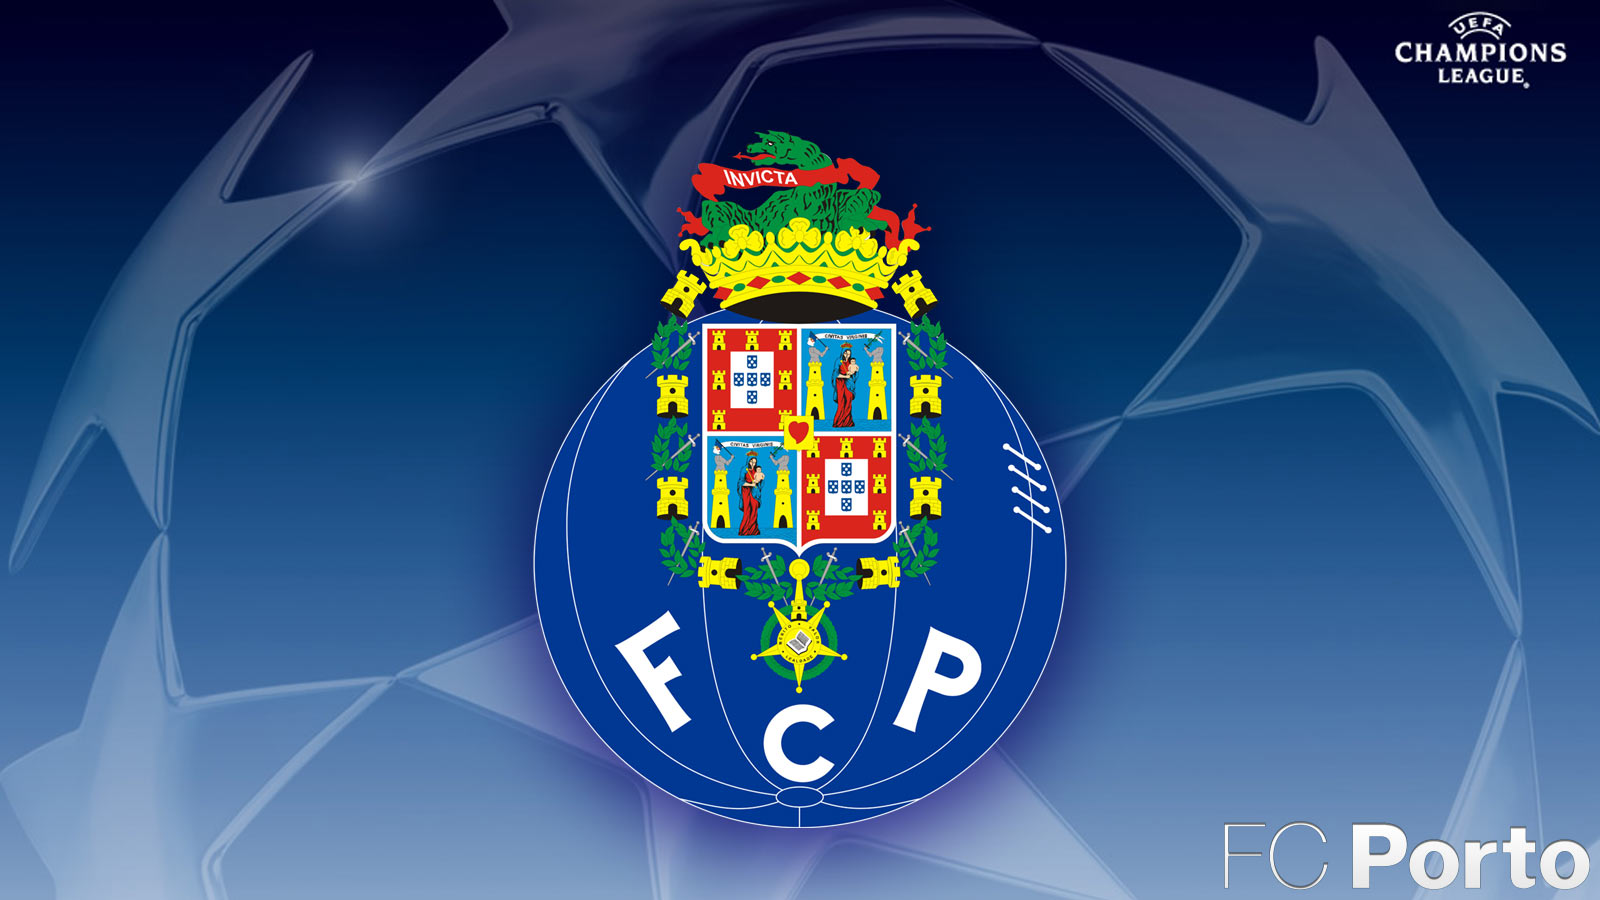 Wallpapers HD: Wallpapers FCPorto